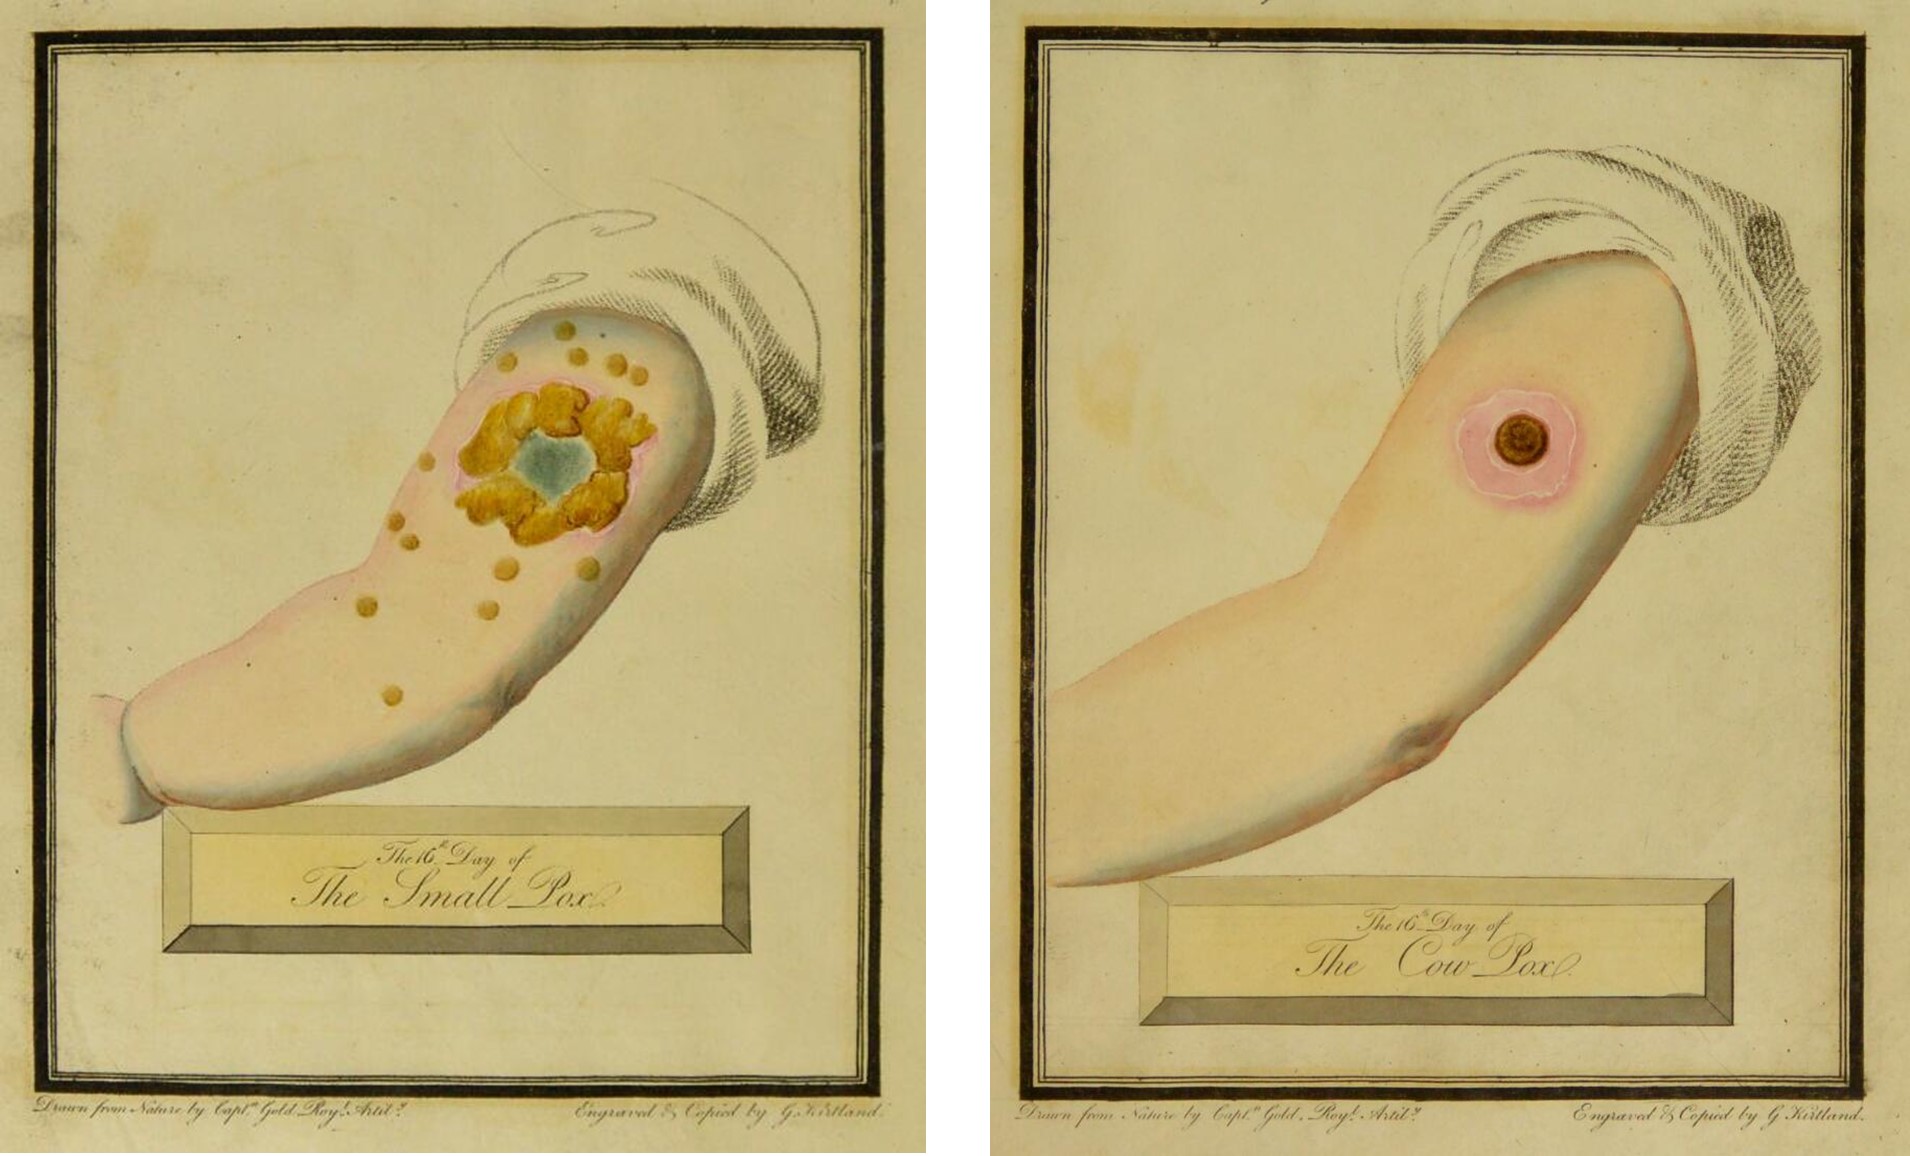 The left image shows an arm with the Small Pox vaccine, it shows wound surrounded by brown pox marks.  The right arm shows the cow pox vaccination, it has a small red mark surrounded by pink skin.